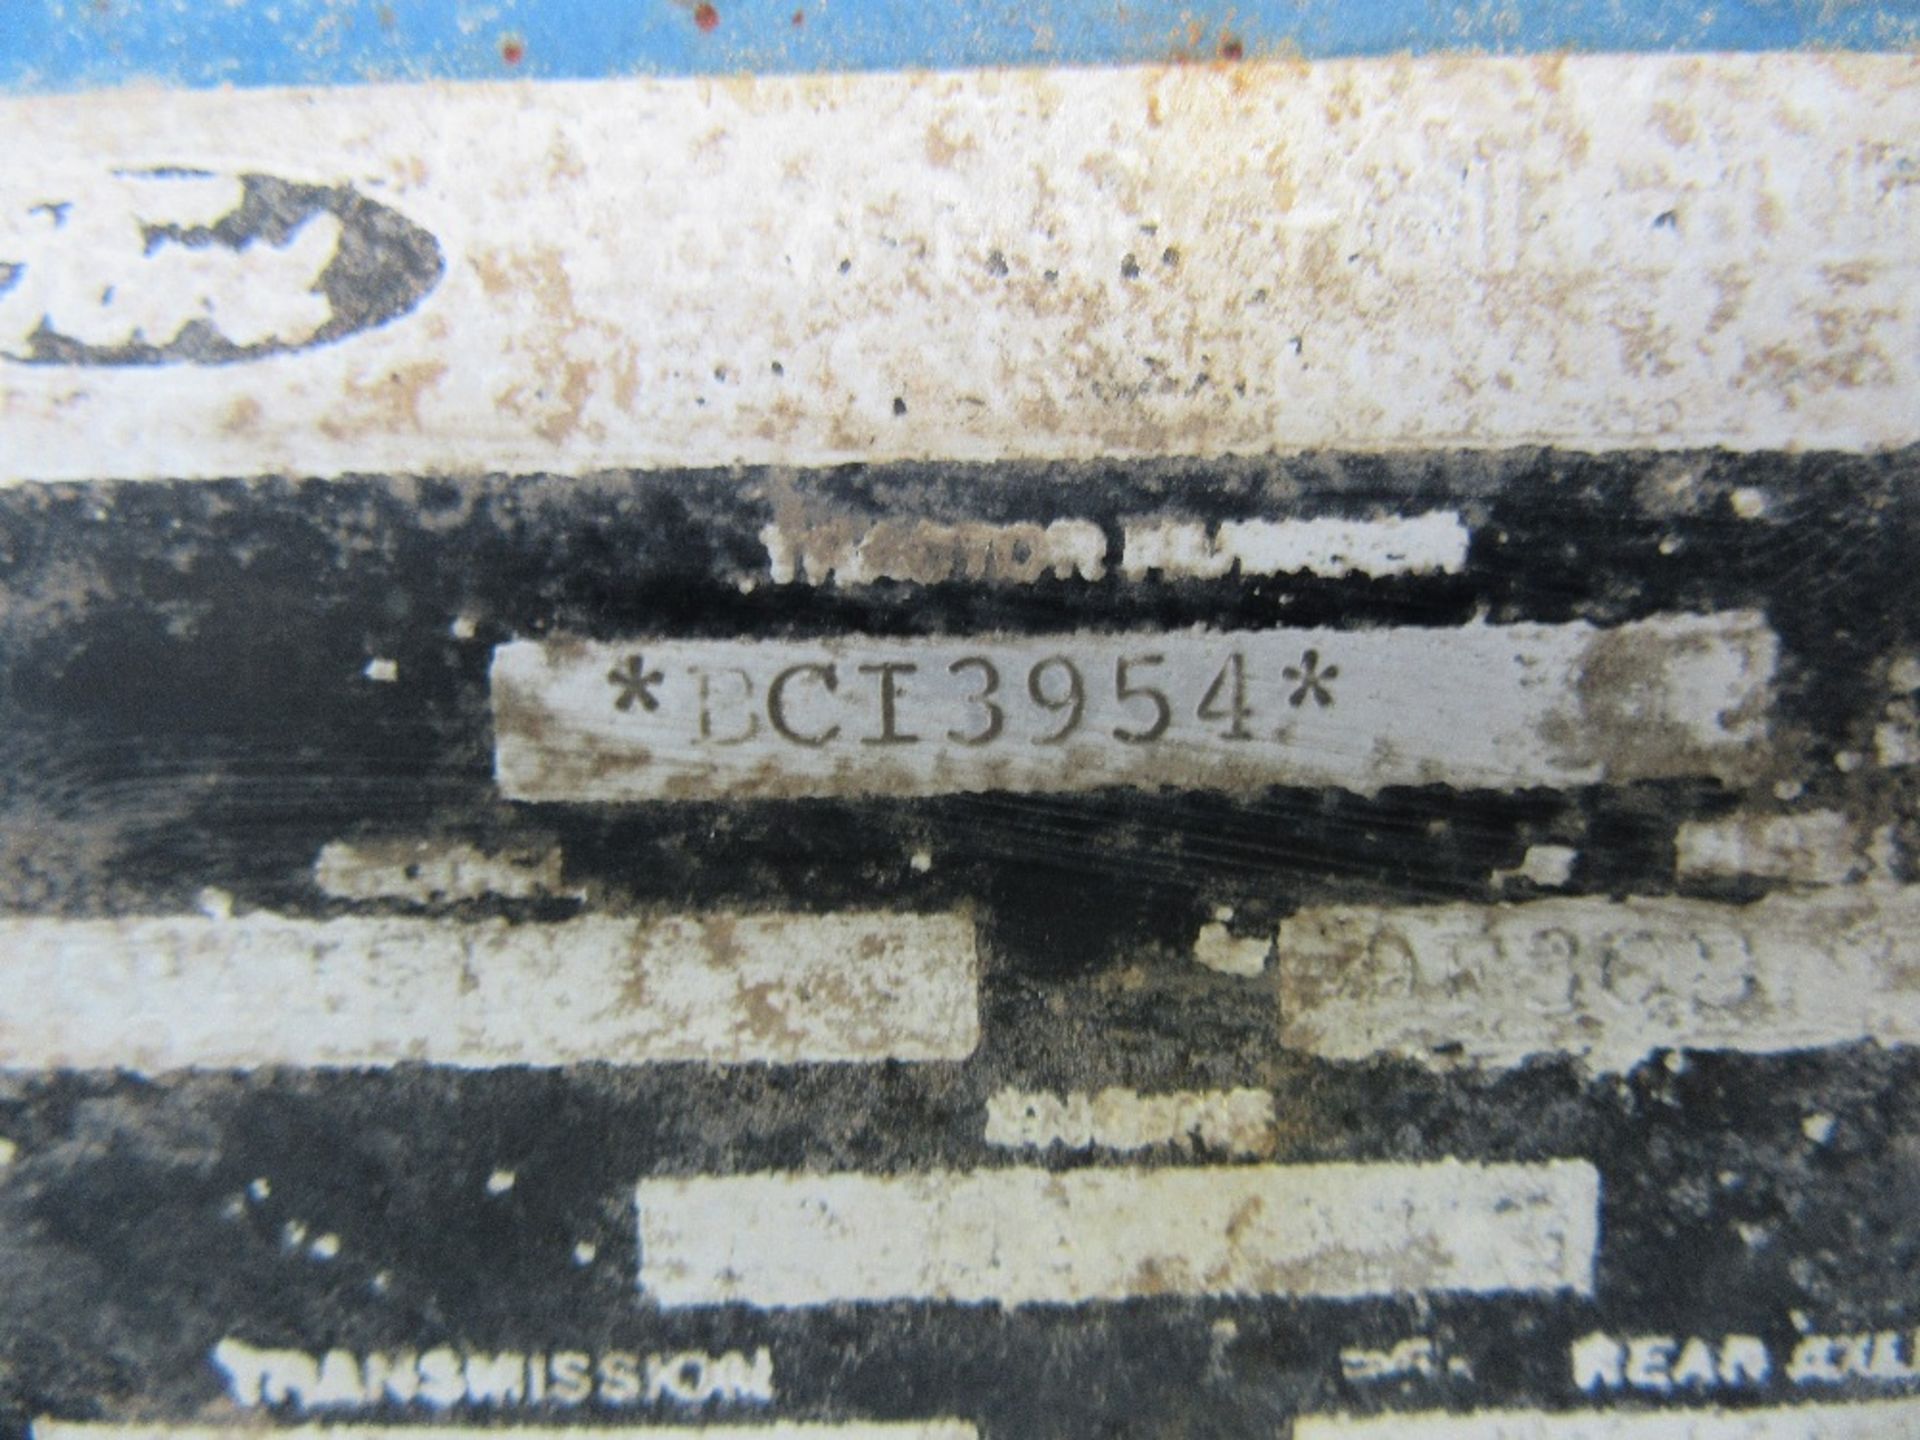 Ford 7810 2wd Tractor Ser.No. 03611009 - Image 10 of 11